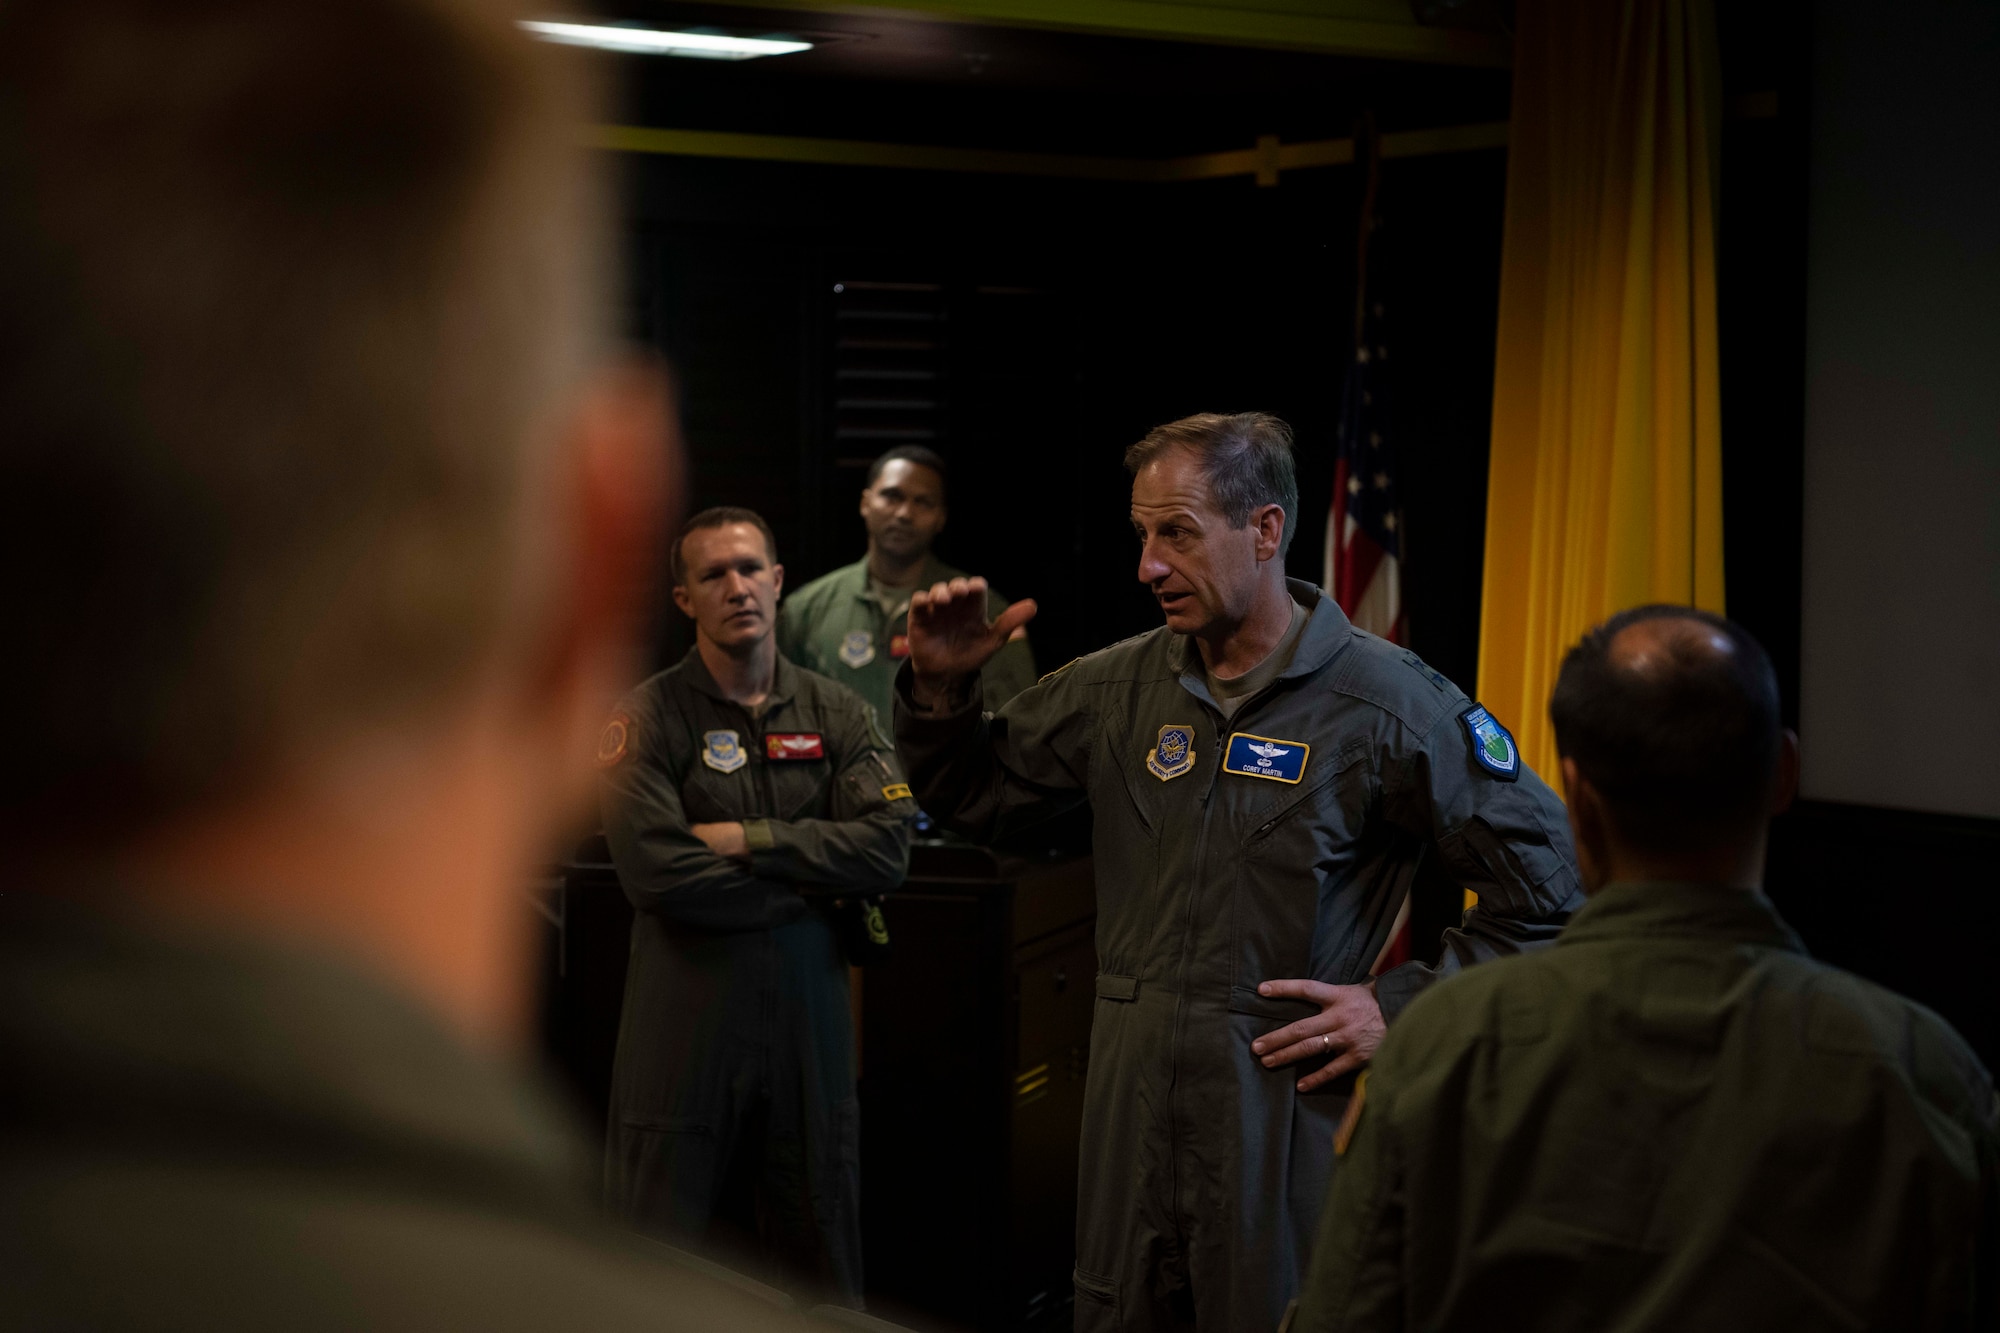 An Airman speaks to a group of Airmen.